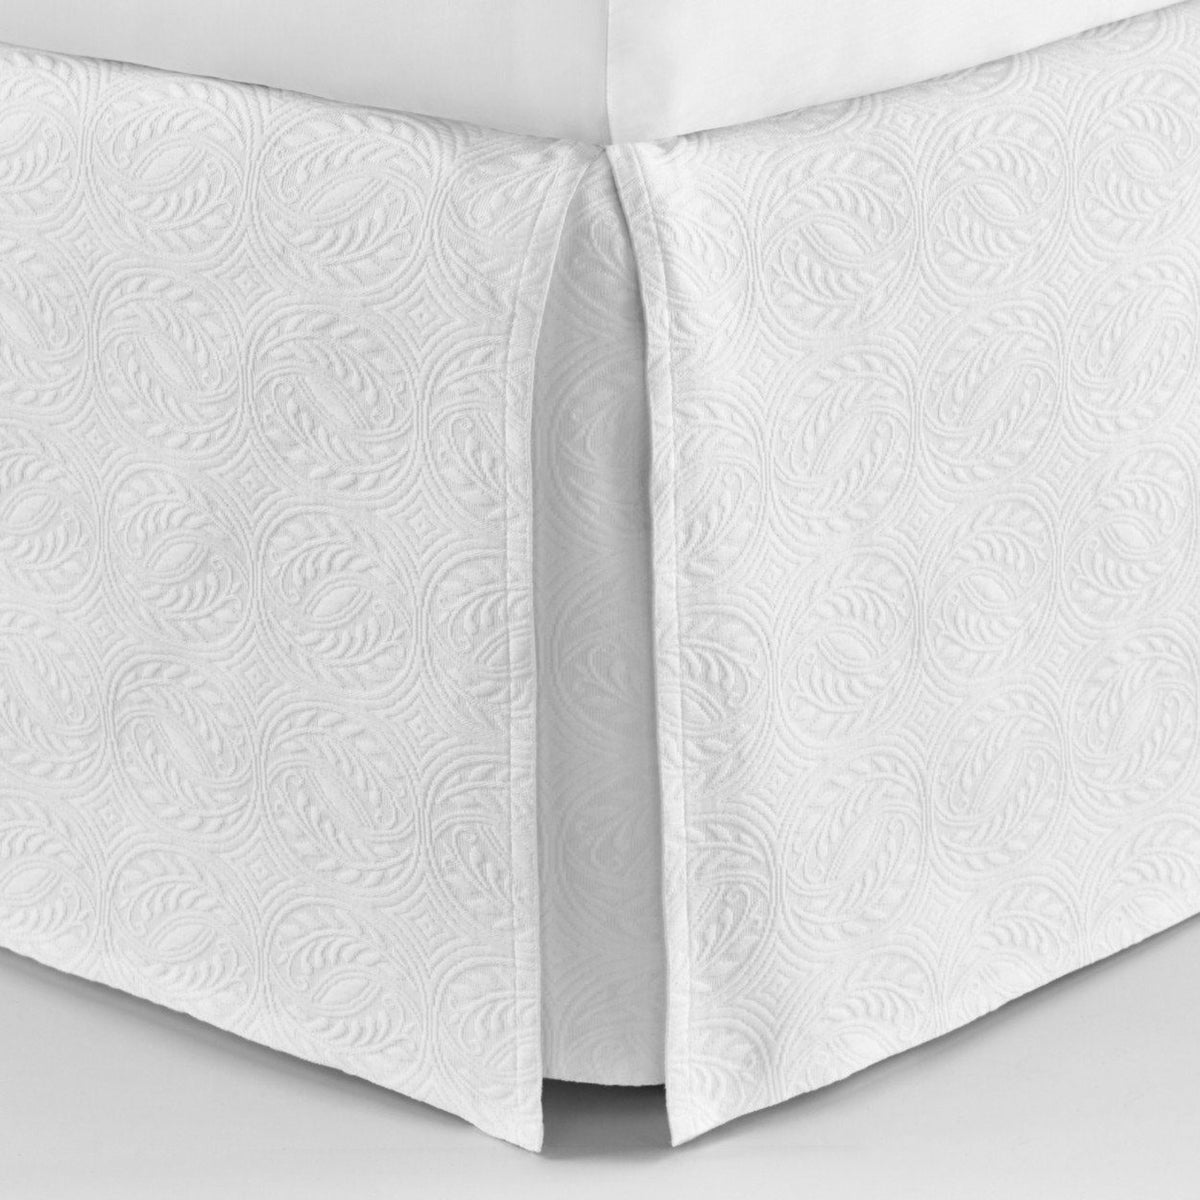 Peacock Alley Vienna Matelassé Tailored Bed Skirt White Fine Linens